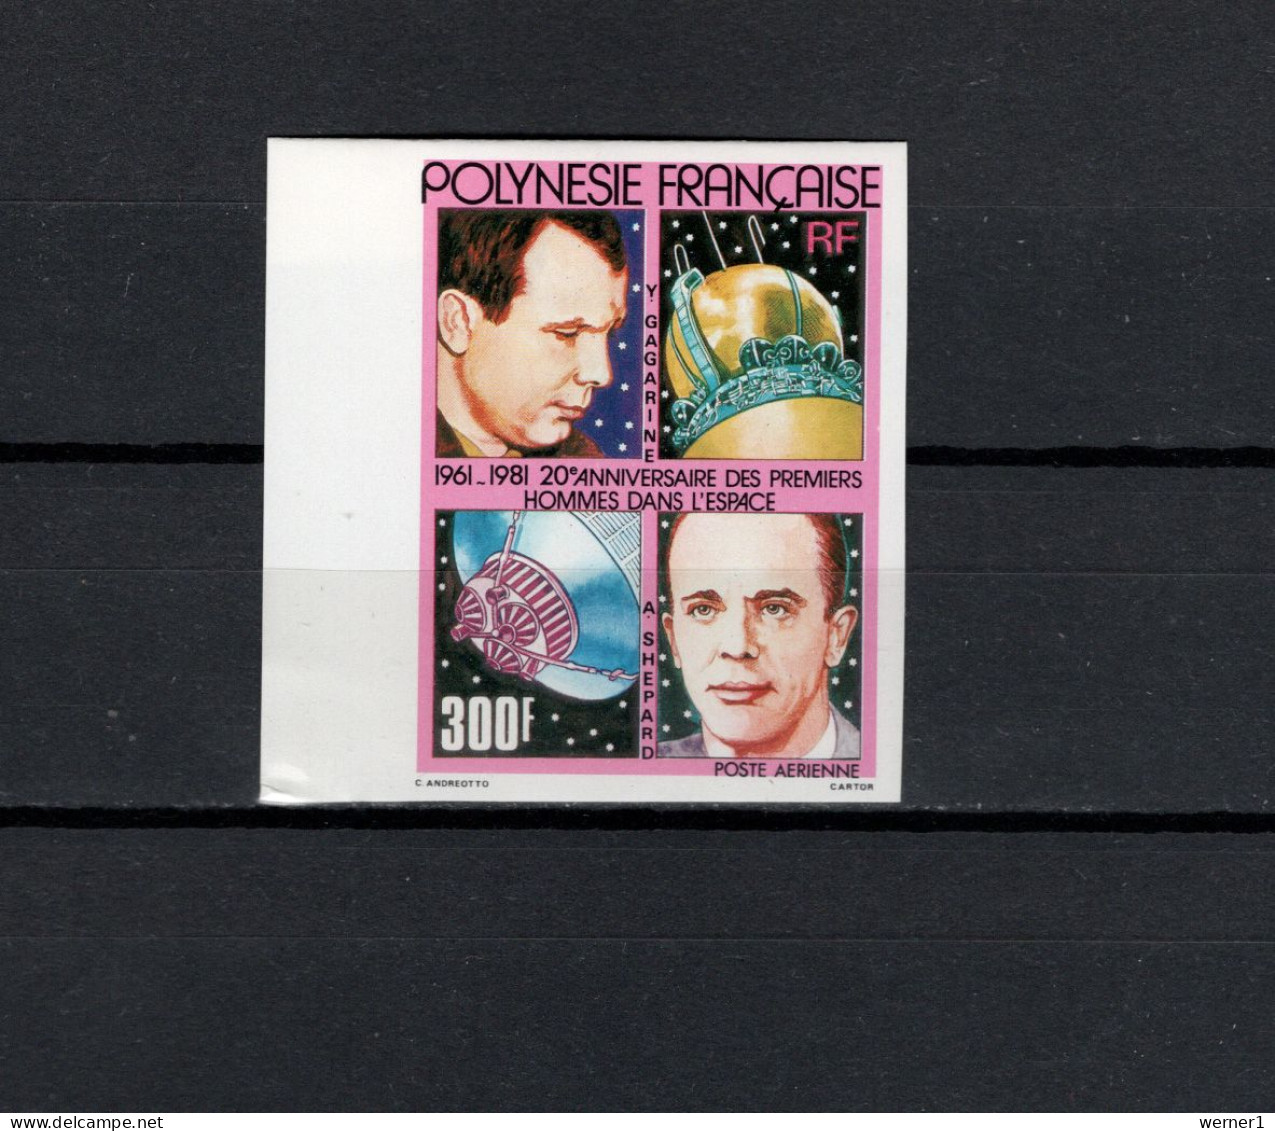 French Polynesia 1981 Space, 20th Anniversary Of Manned Spaceflight Stamp Imperf. MNH -scarce- - Oceanië